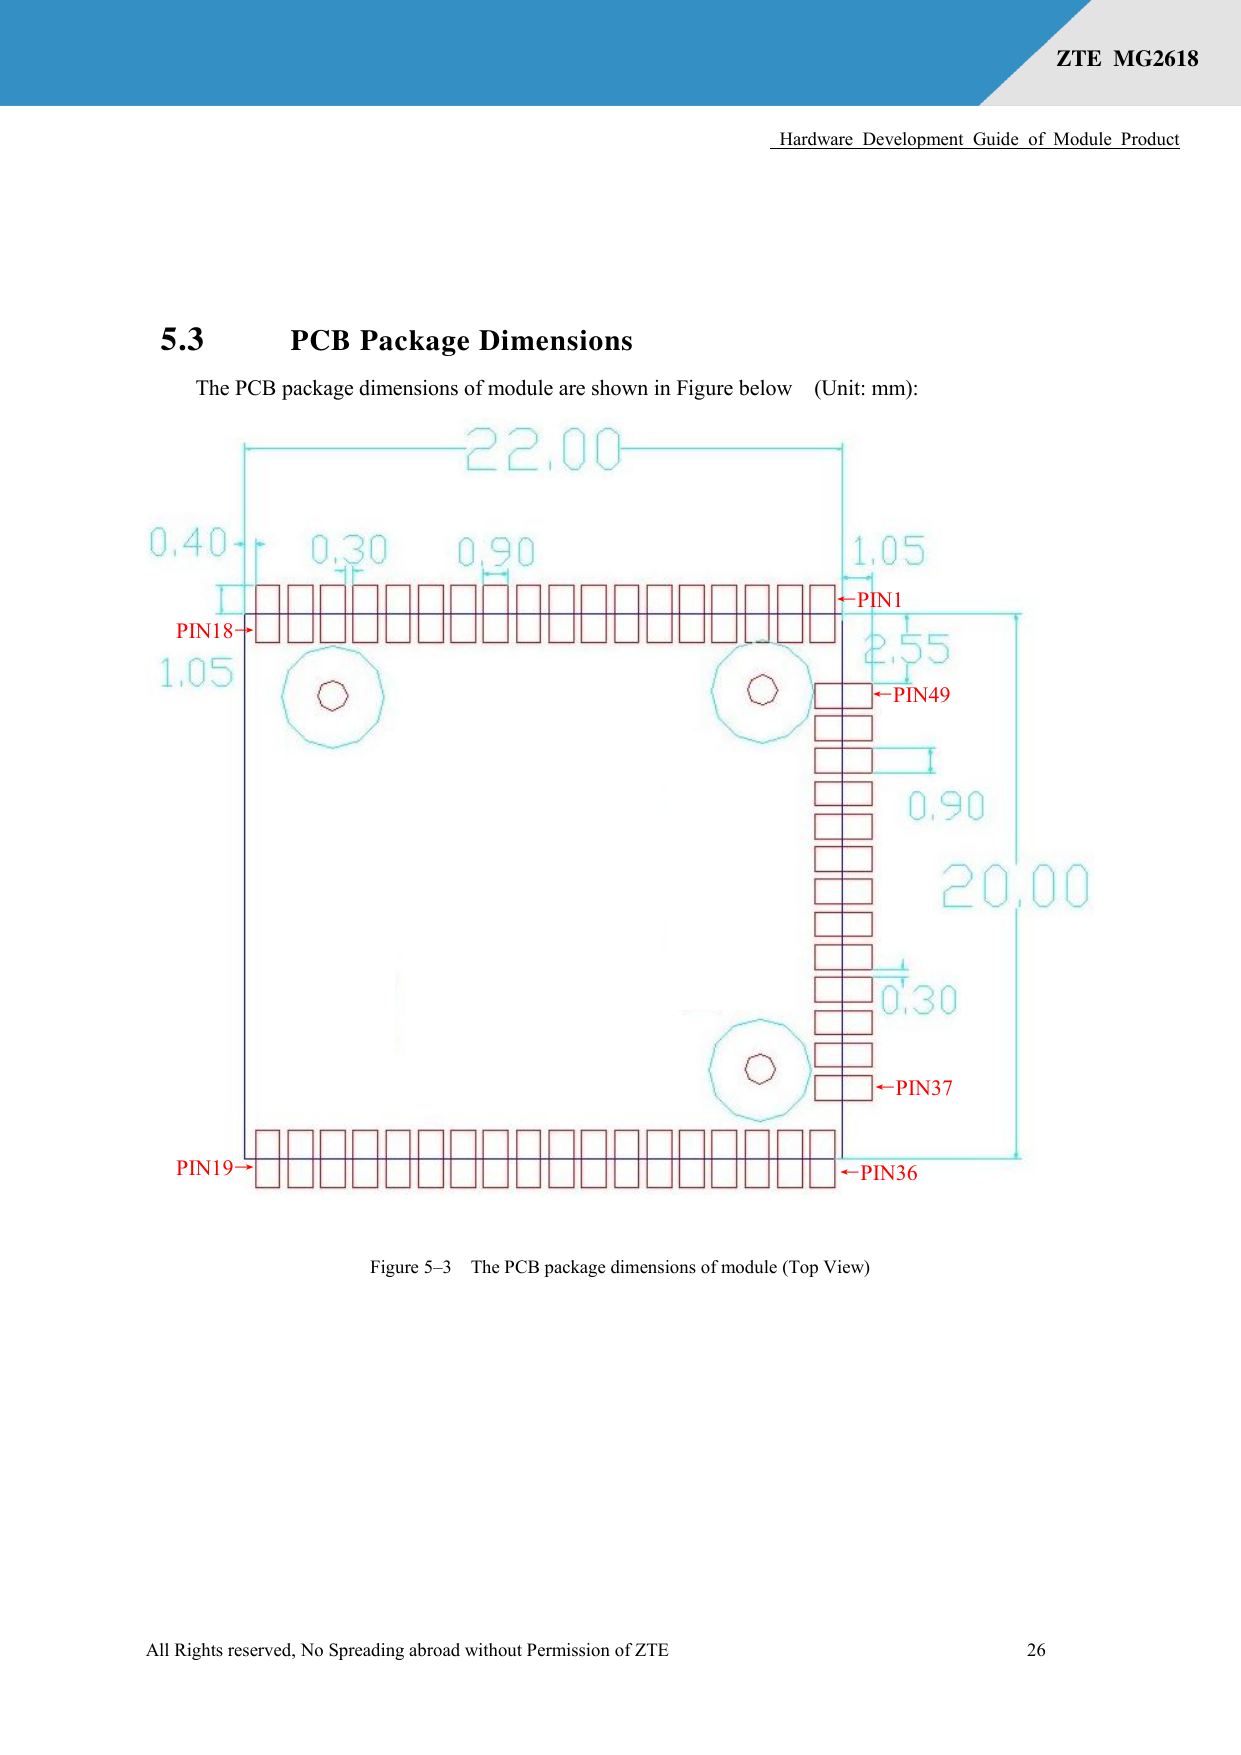      Hardware  Development  Guide  of  Module  Product  All Rights reserved, No Spreading abroad without Permission of ZTE              26 ZTE  MG2618    5.3 PCB Package Dimensions The PCB package dimensions of module are shown in Figure below    (Unit: mm):  Figure 5–3  The PCB package dimensions of module (Top View) ←PIN1 ←PIN49 PIN18→ PIN19→ ←PIN36 ←PIN37    